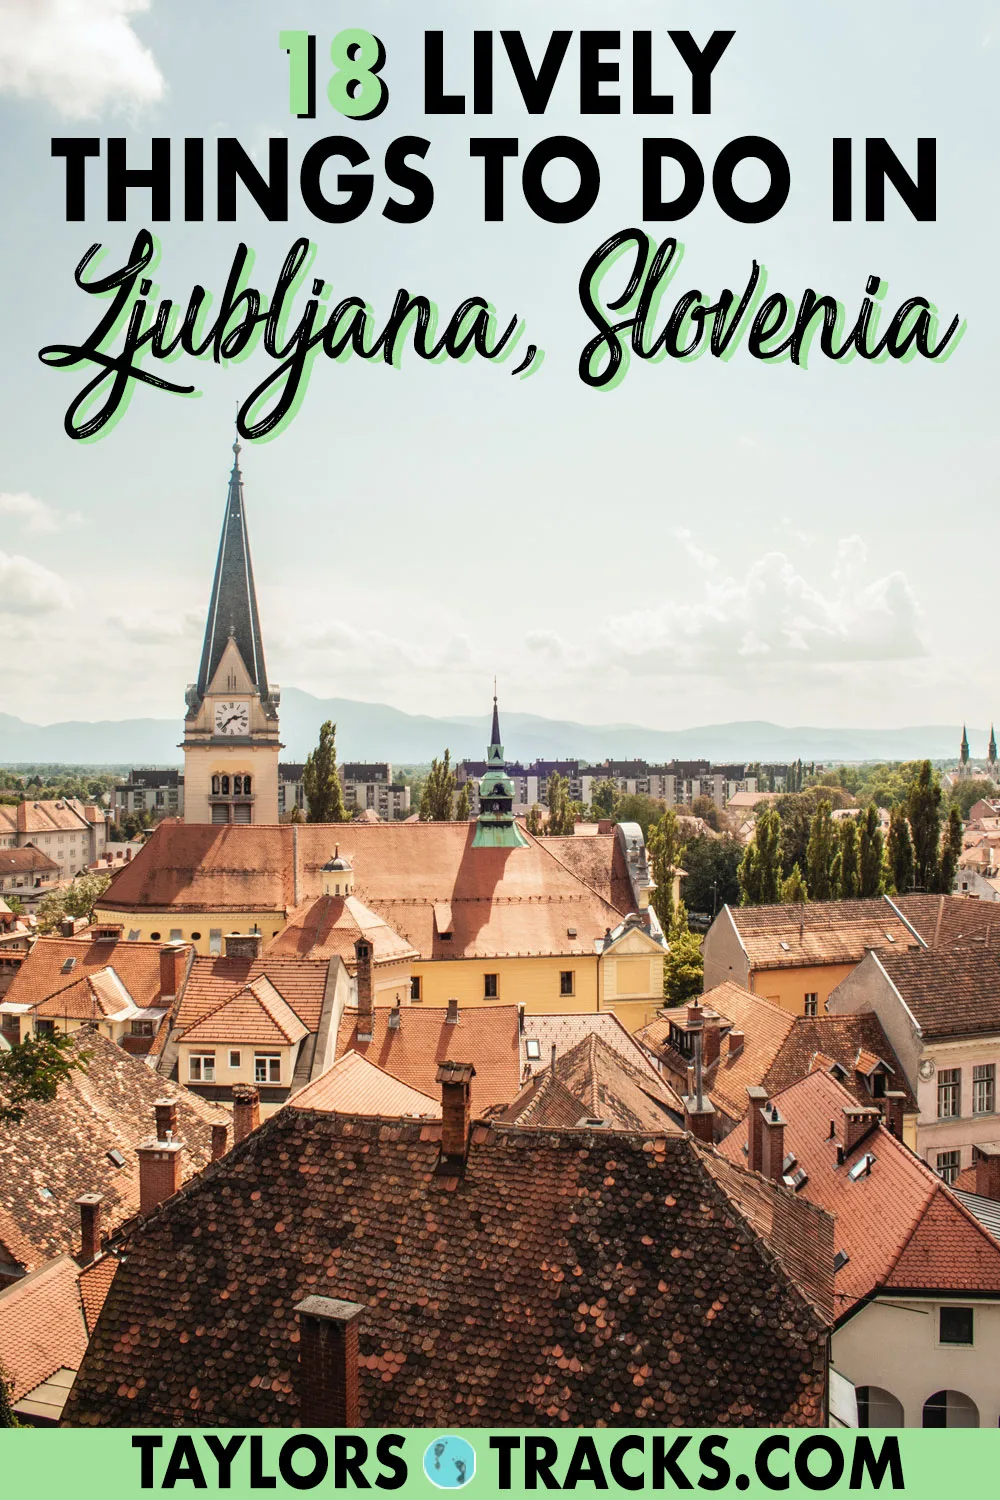 Without a doubt you'll spend some time in Ljubljana, Slovenia's capital if you choose to visit this European gem. This small city is charming, even for Europe's standards and is well worth visiting on your Slovenia trip. Click to find the best things to do in Ljubljana and be pleasantly surprised with how much there is to do!